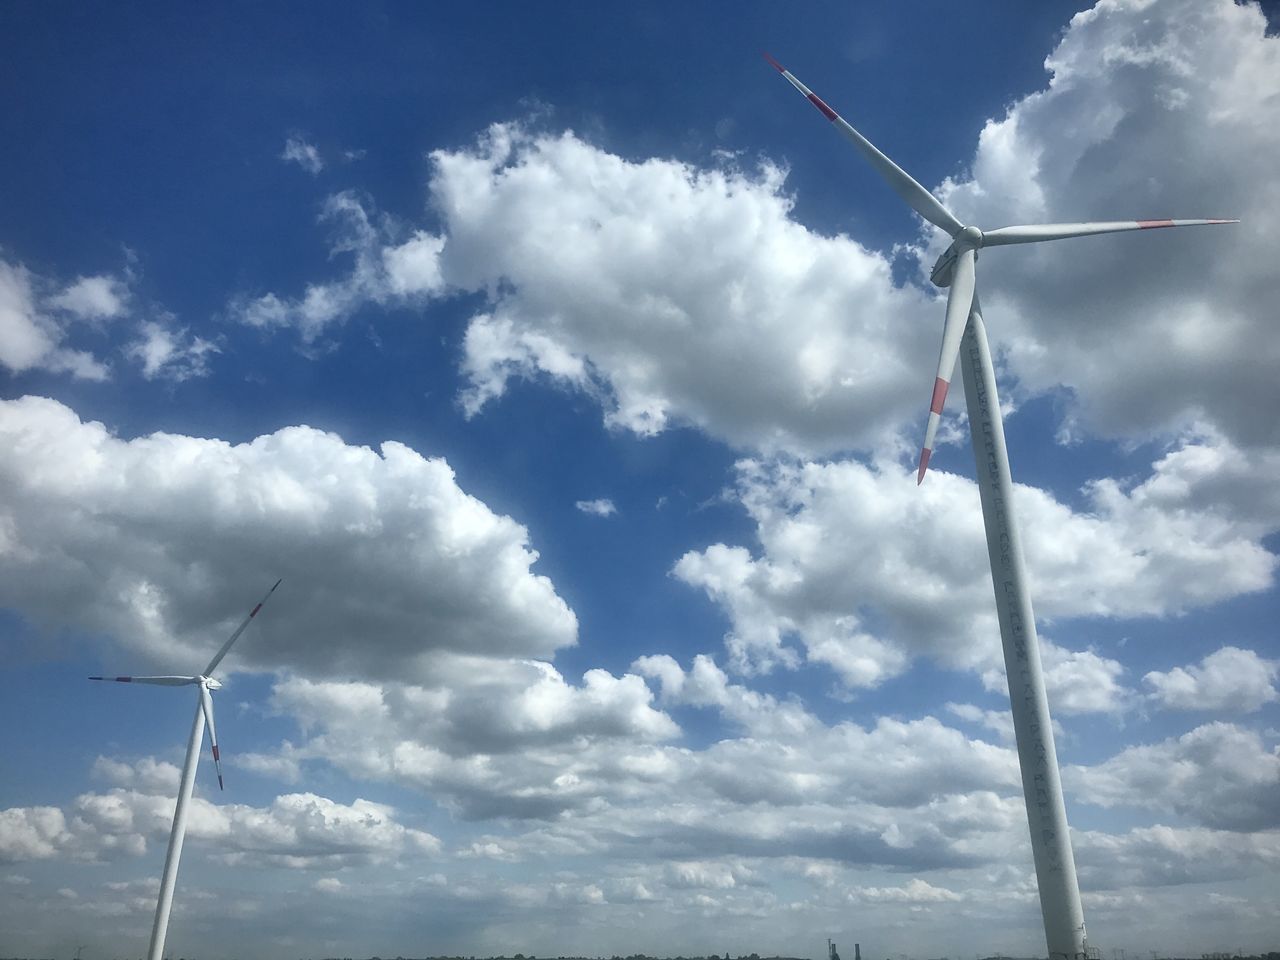 LOW ANGLE VIEW OF WINDMILLS AGAINST SKY